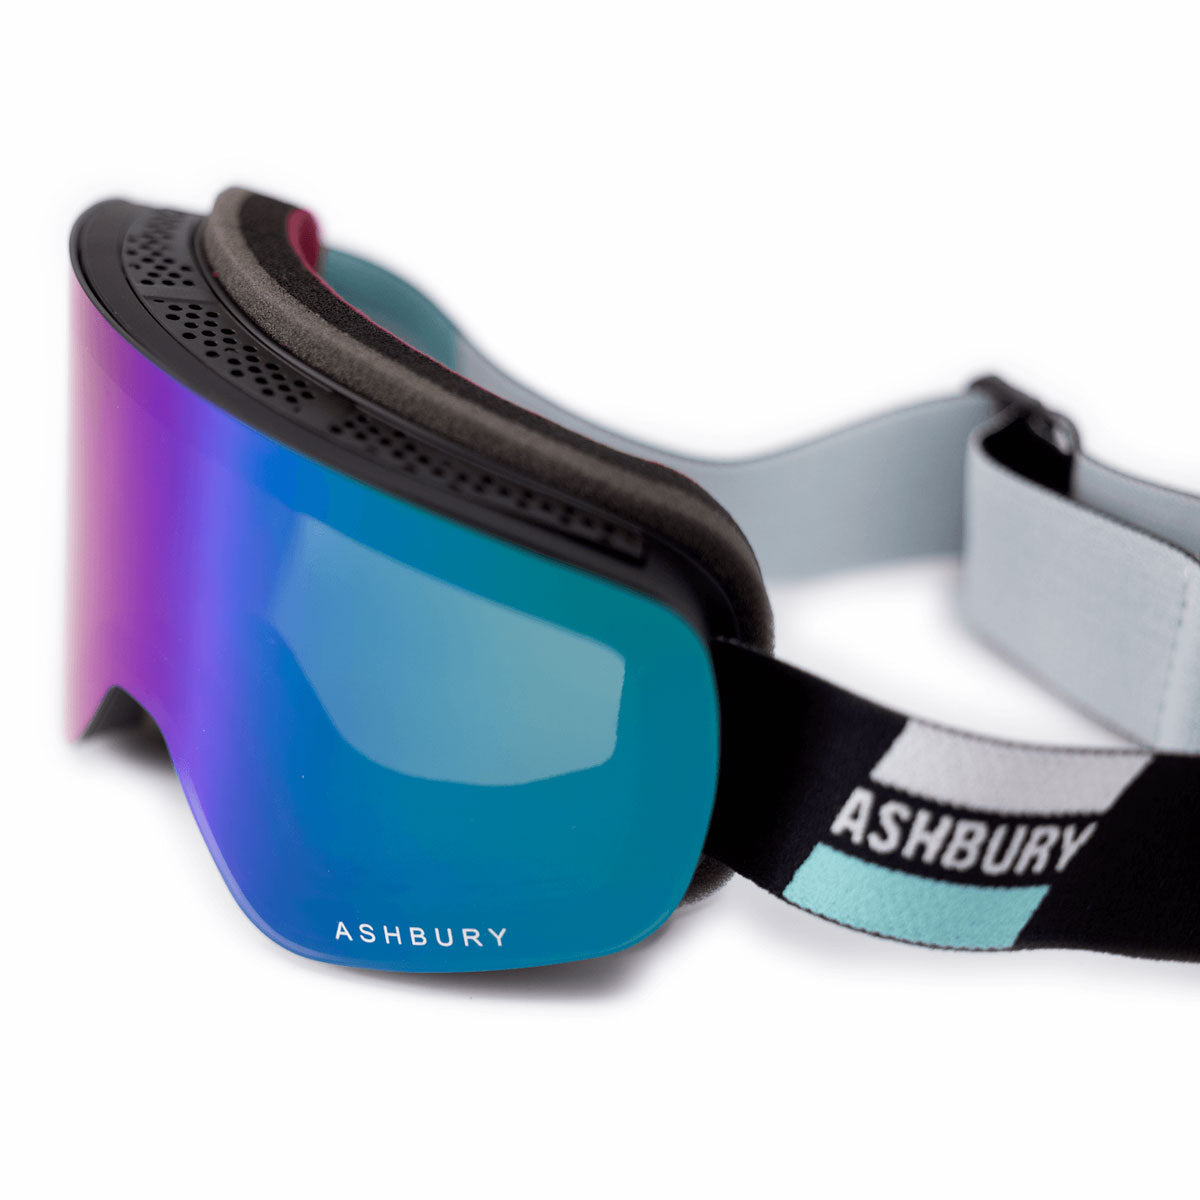 Ashbury Sonic Merlin Snowboard Goggles - Teal Mirror/Yellow Spare image 4